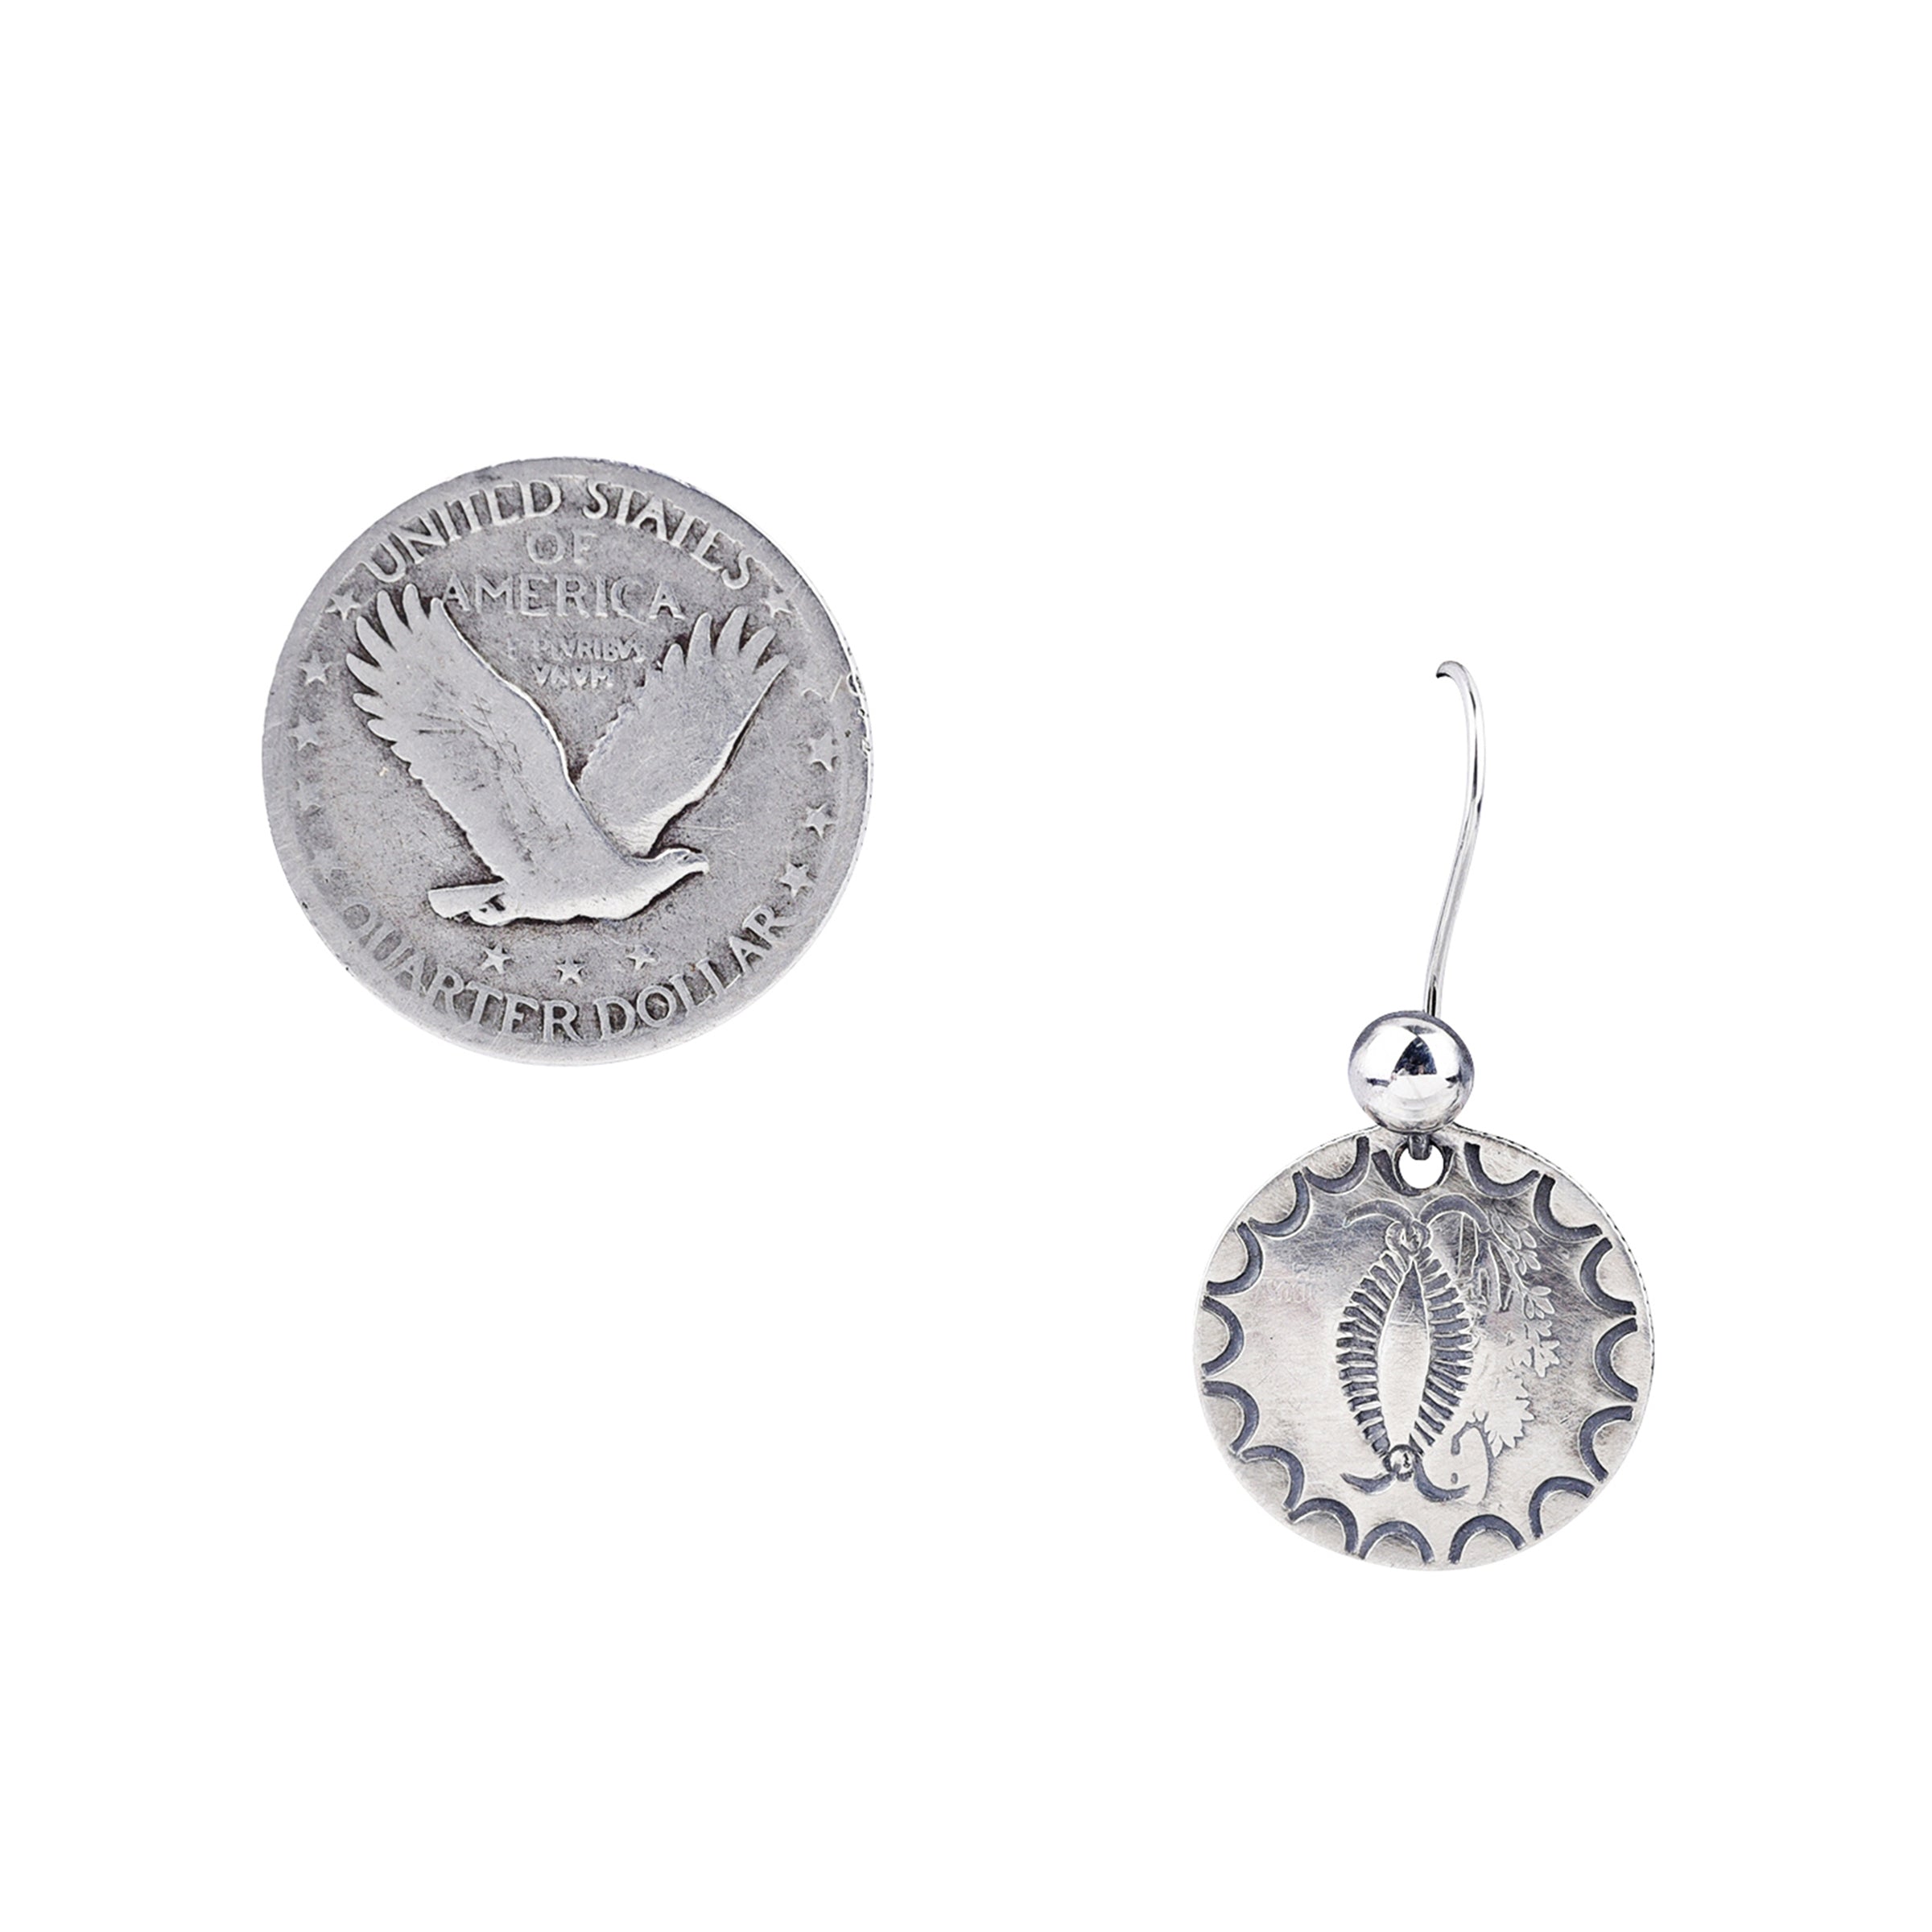 Jesse Robbins Coin Stamp Earrings